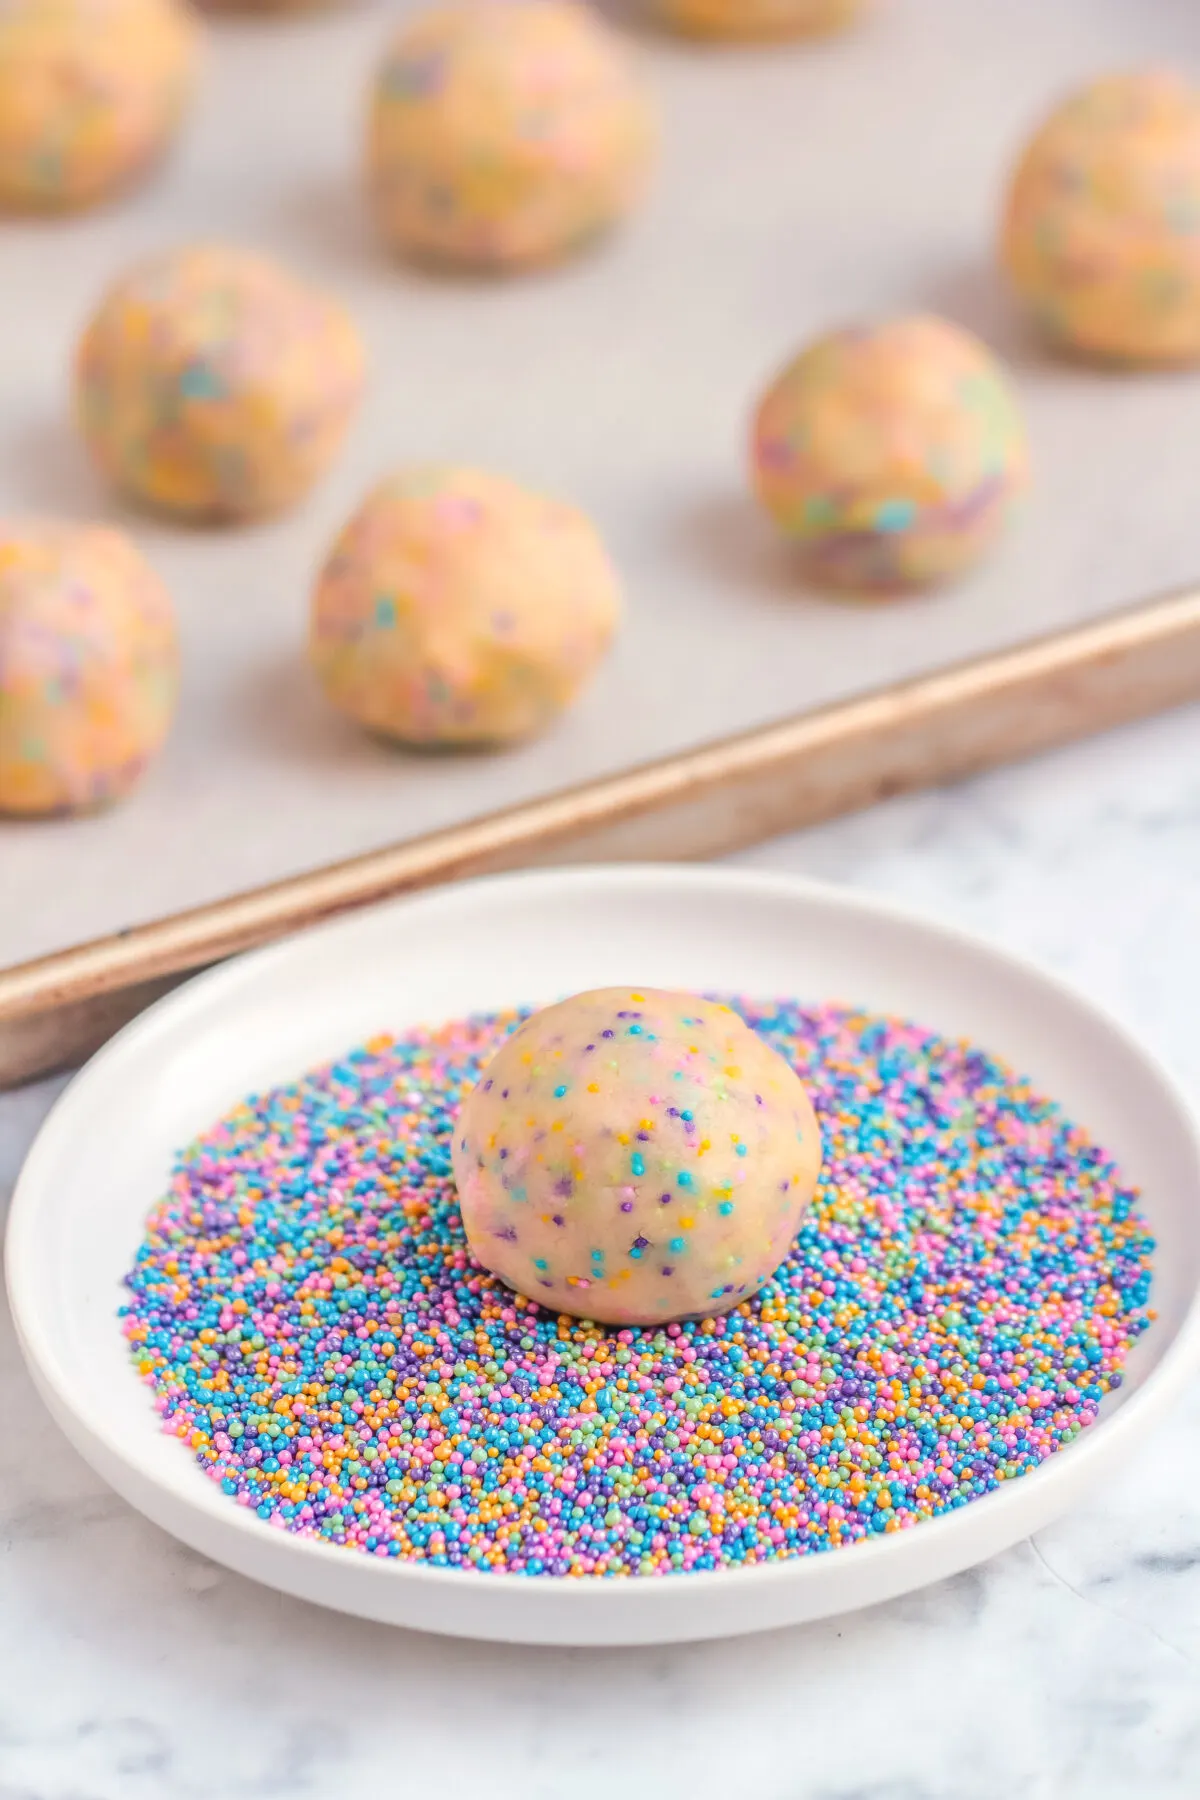 Cookie dough pressed into a plate full of sprinkles.